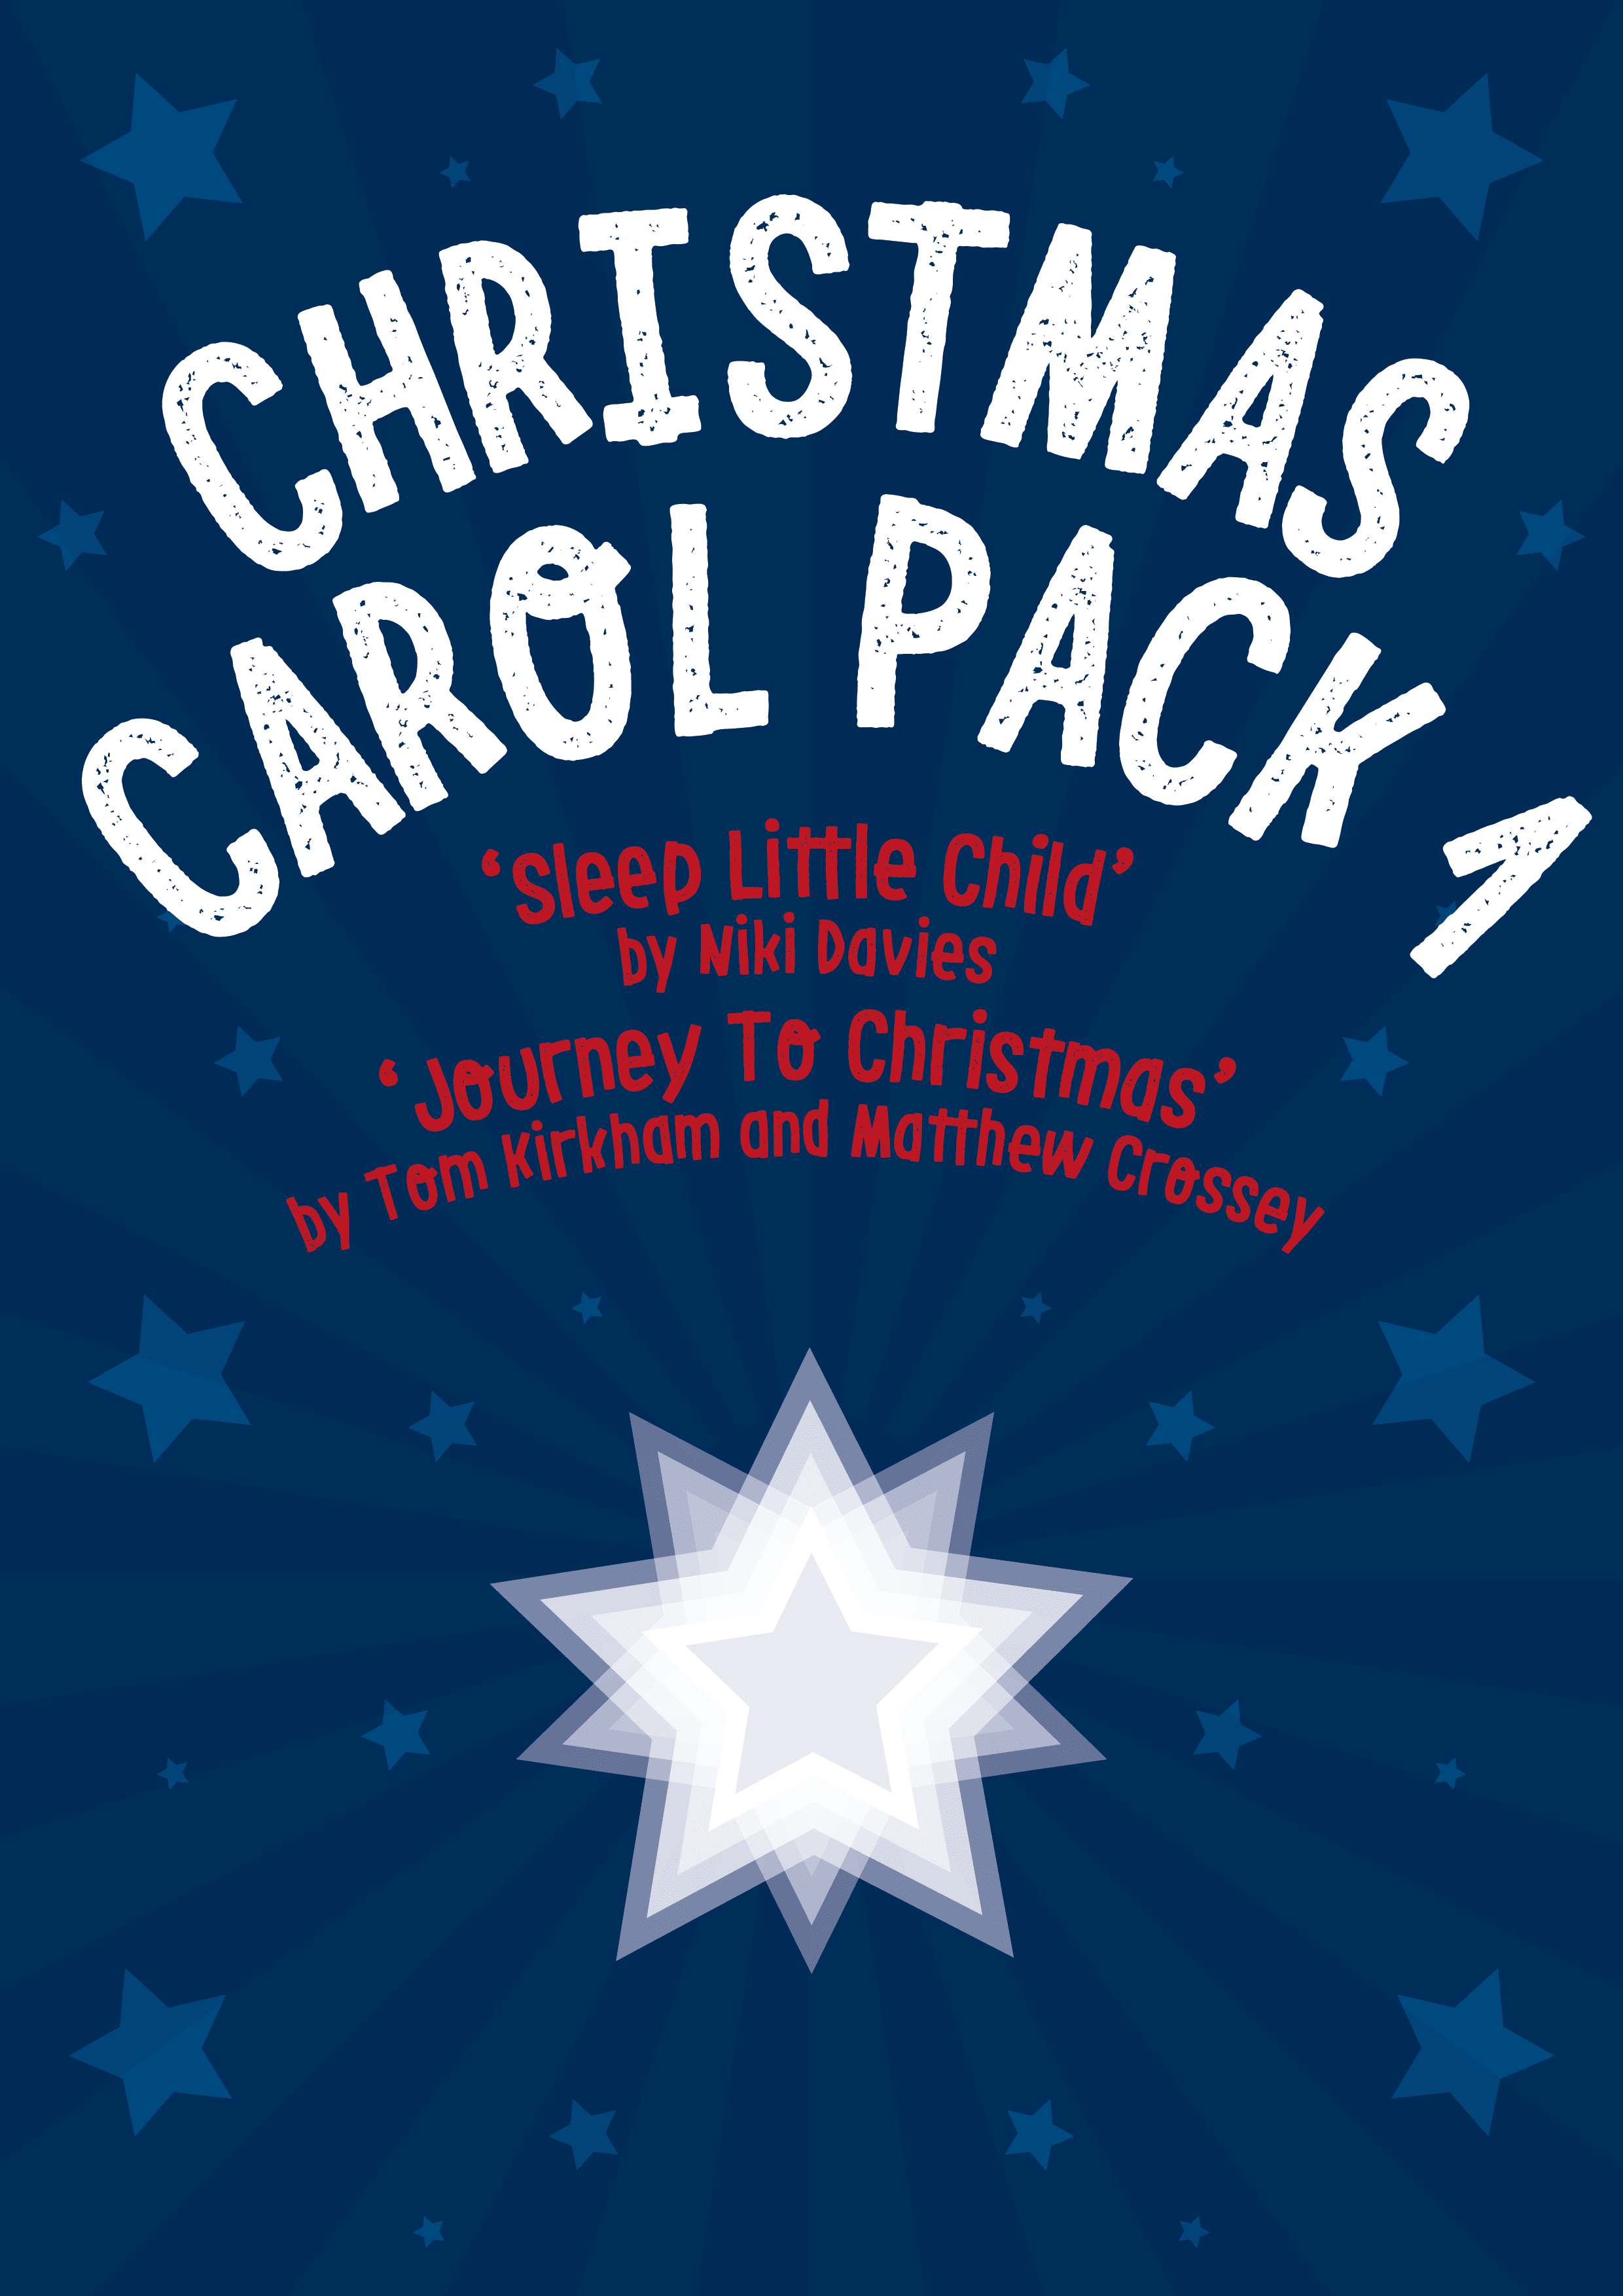 Christmas Carols Download Pack - 100% discount with code CAROLS100